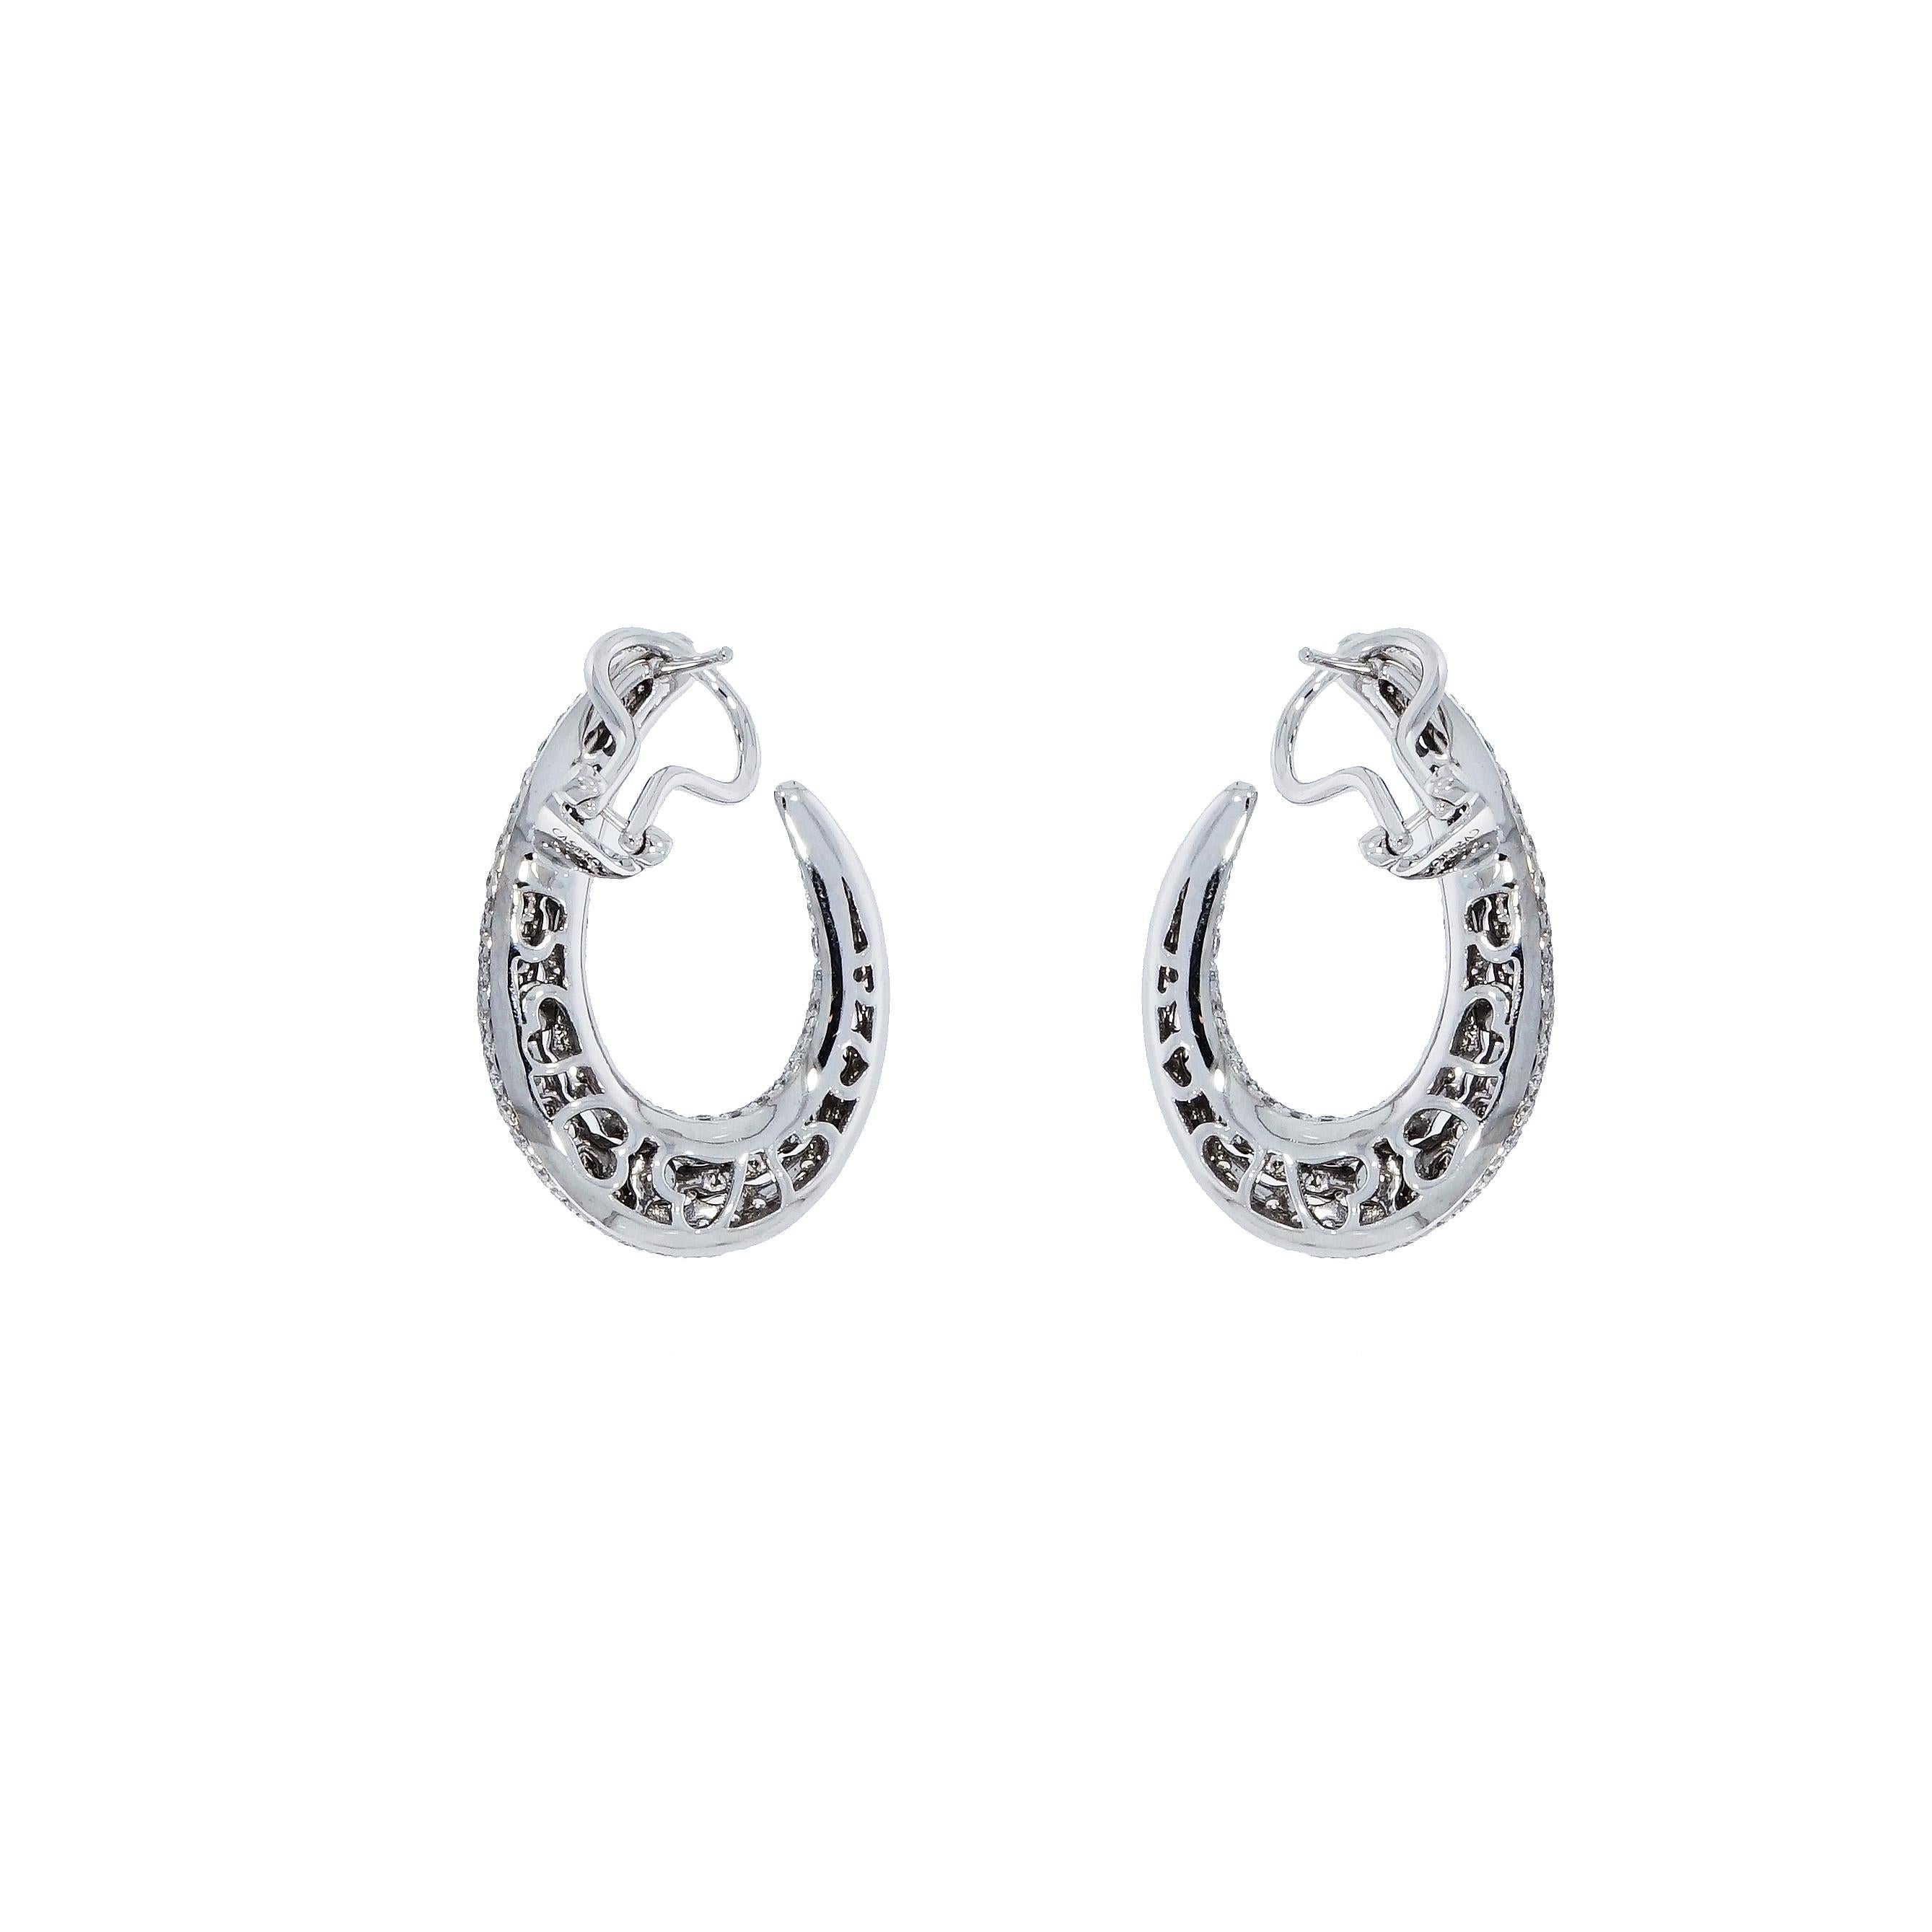 A unique design created by Casato... a jewel of unforgettable beauty. 
This pair of earrings from the 